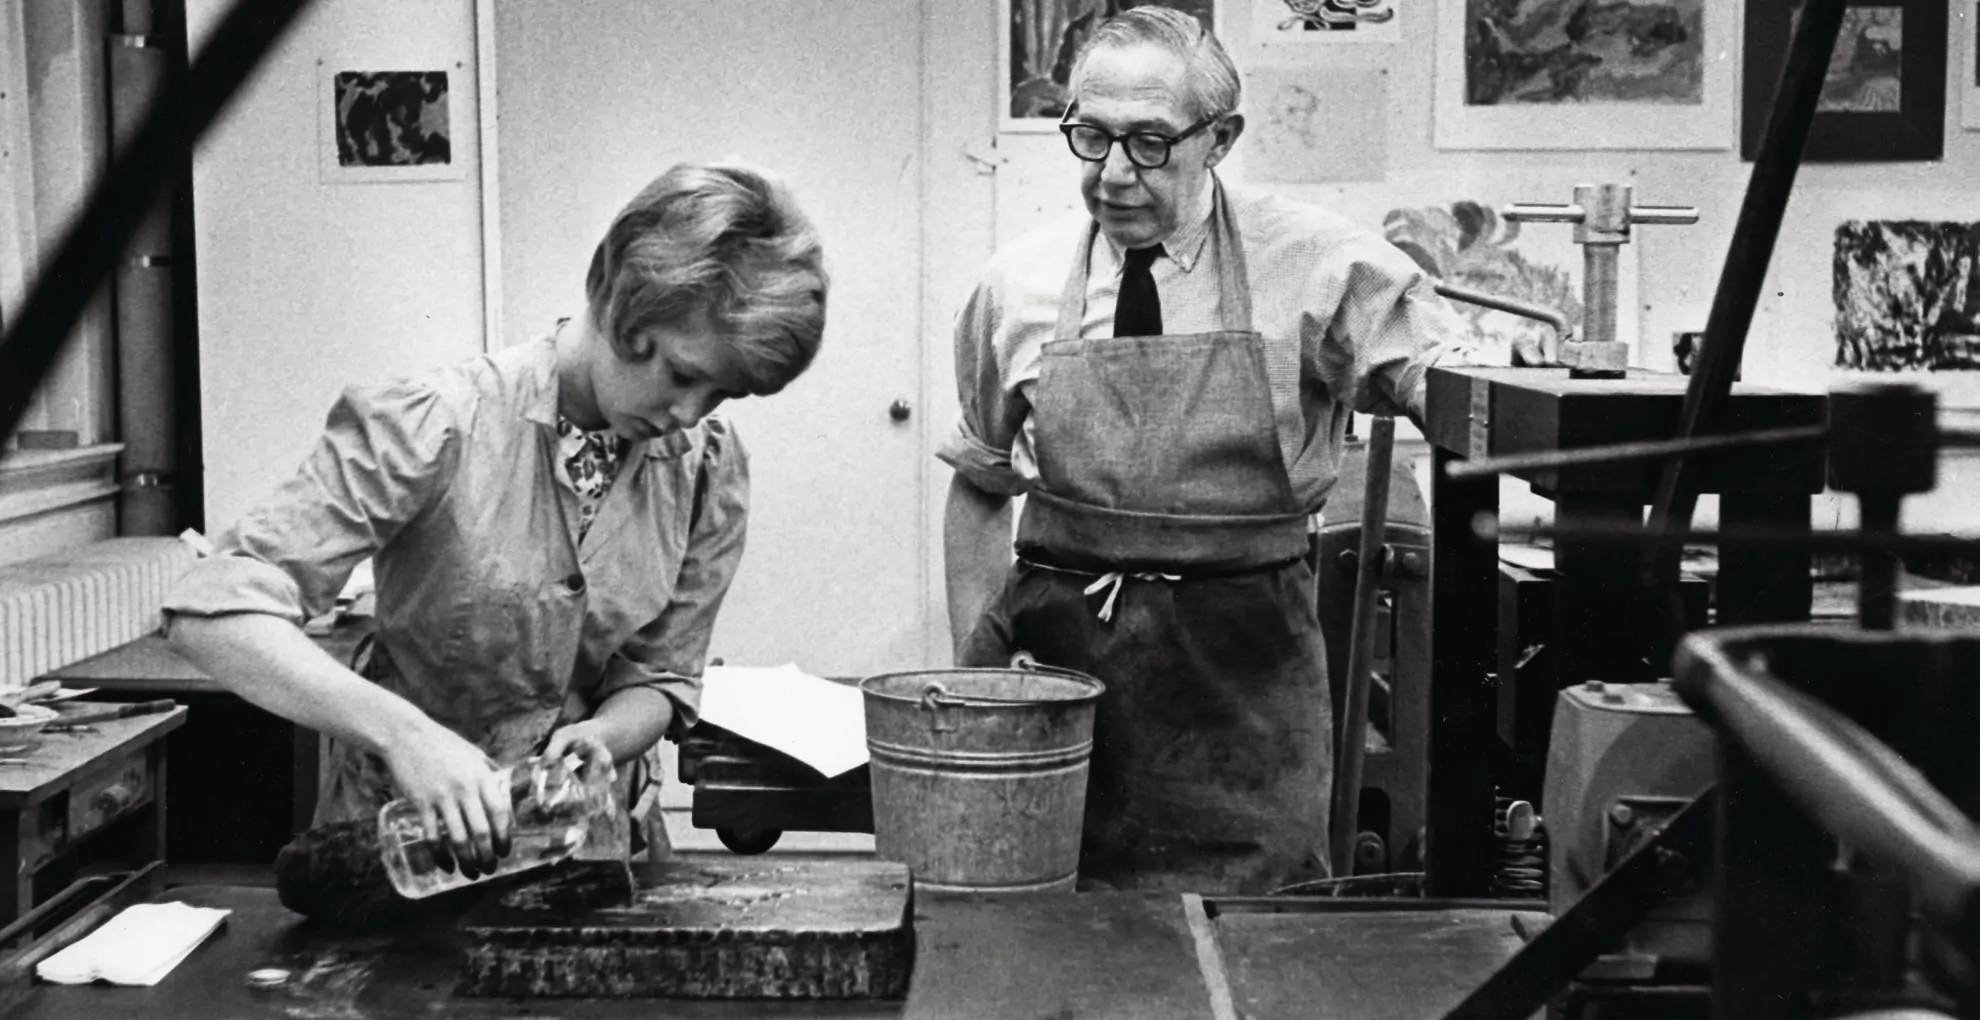 A professor guiding a student on pouring liquid for an art project